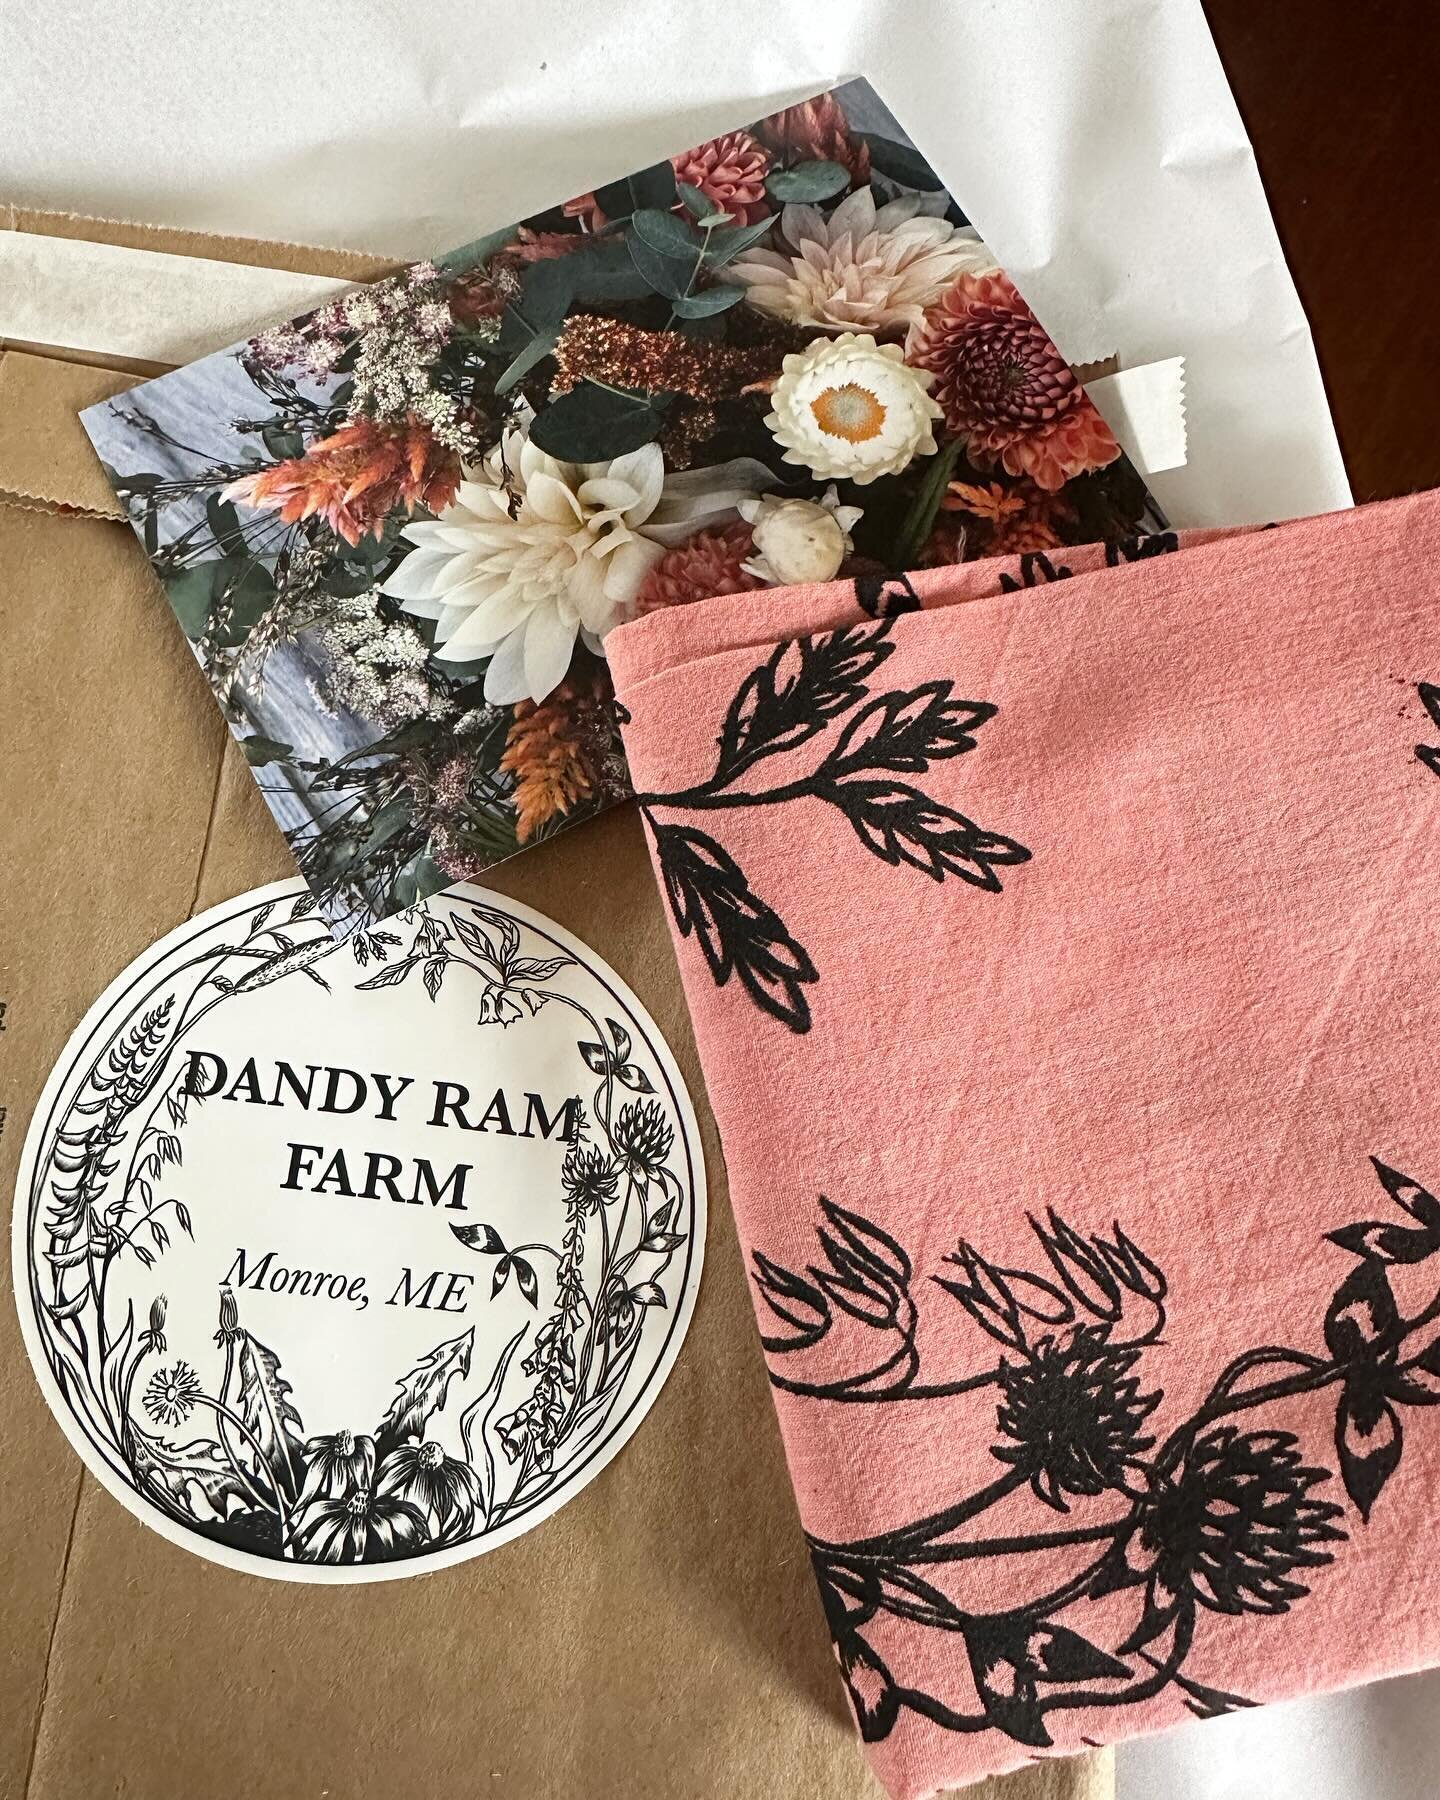 Yes we ship year round! Even when things are slow growing in the farm fields, everlasting florals and plant dyed organic cotton bandanas ship out each week around the country. The new bouquet sleeve sticker is getting some air time on packages before